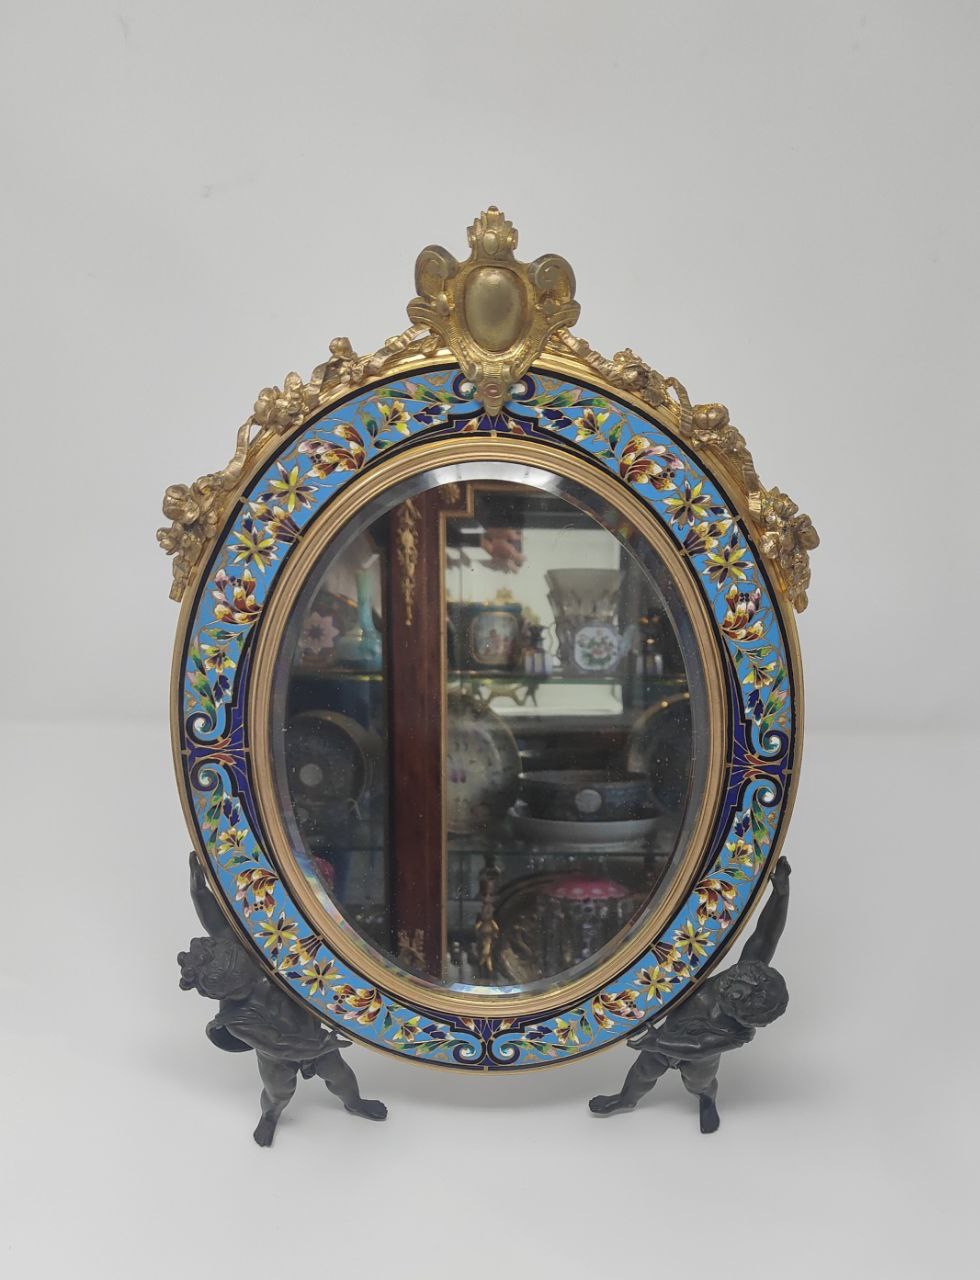 A champleve enamel and bronze mirror